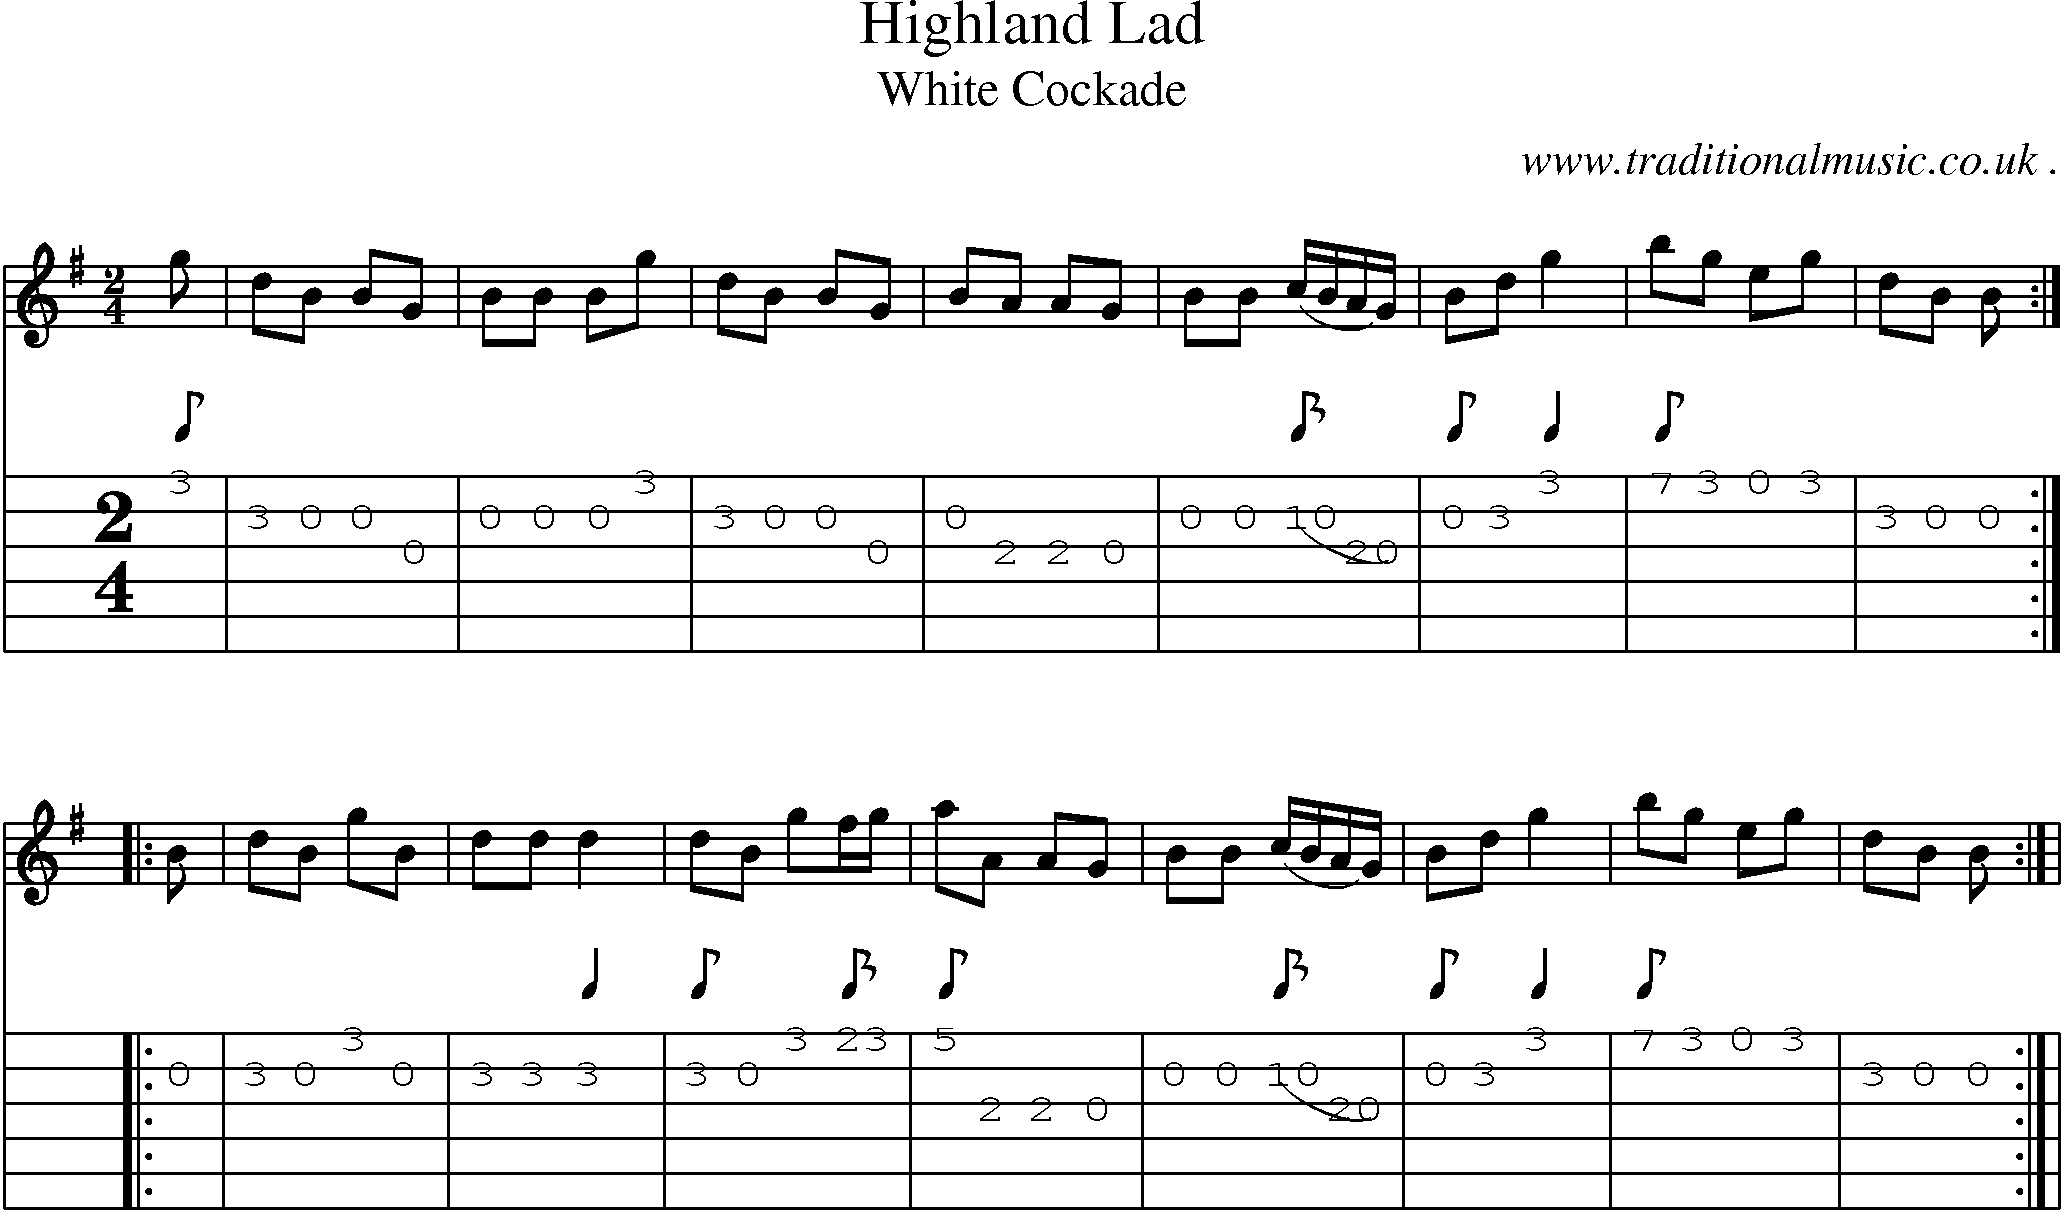 Sheet-Music and Guitar Tabs for Highland Lad